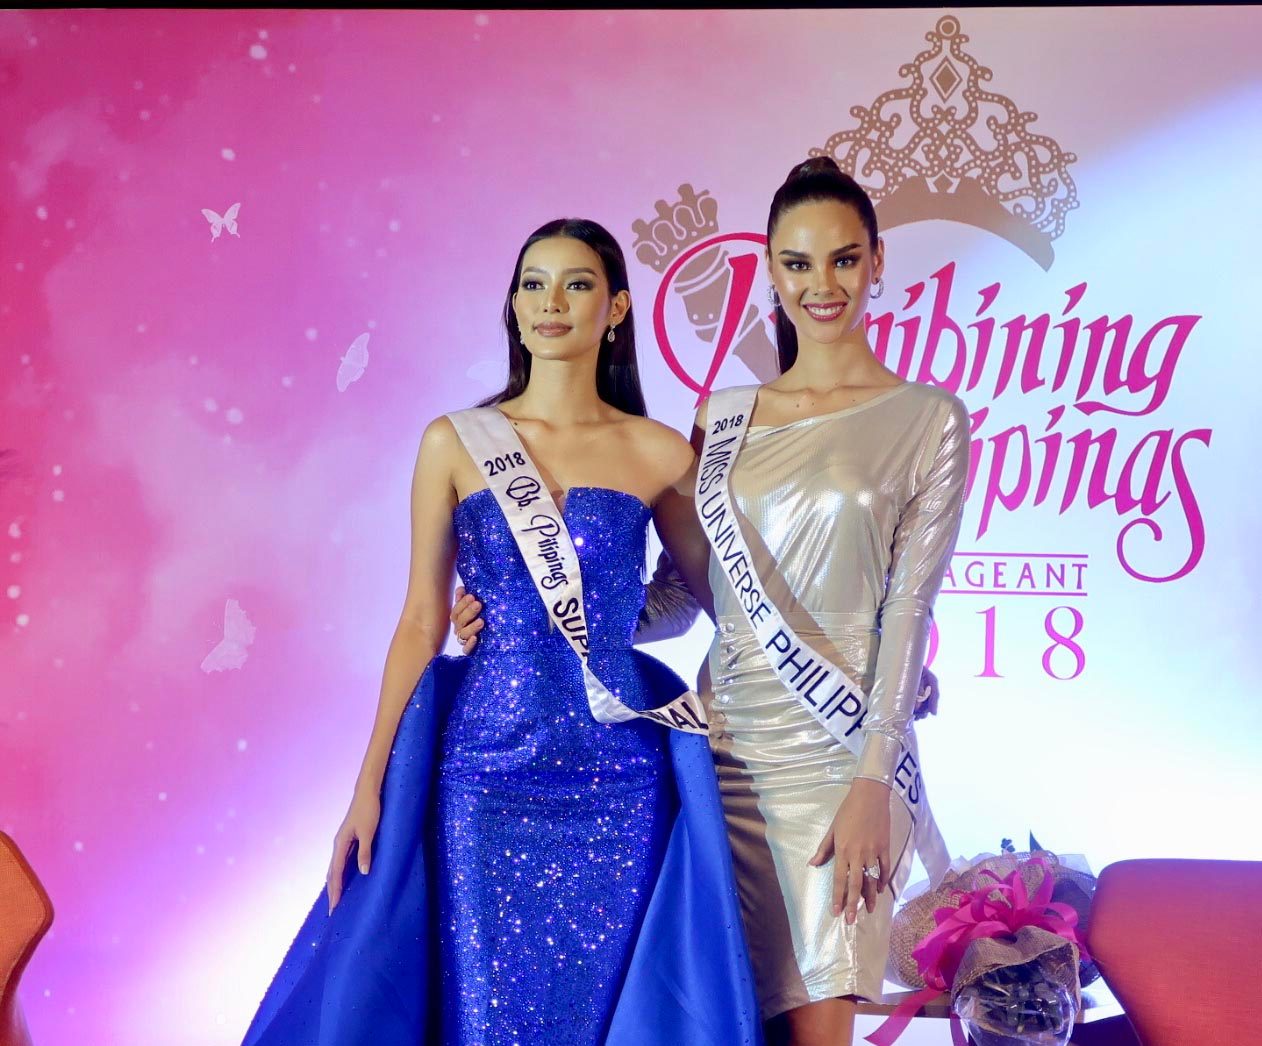 Catriona Gray and Jehza Huelar are ready for their beauty battles